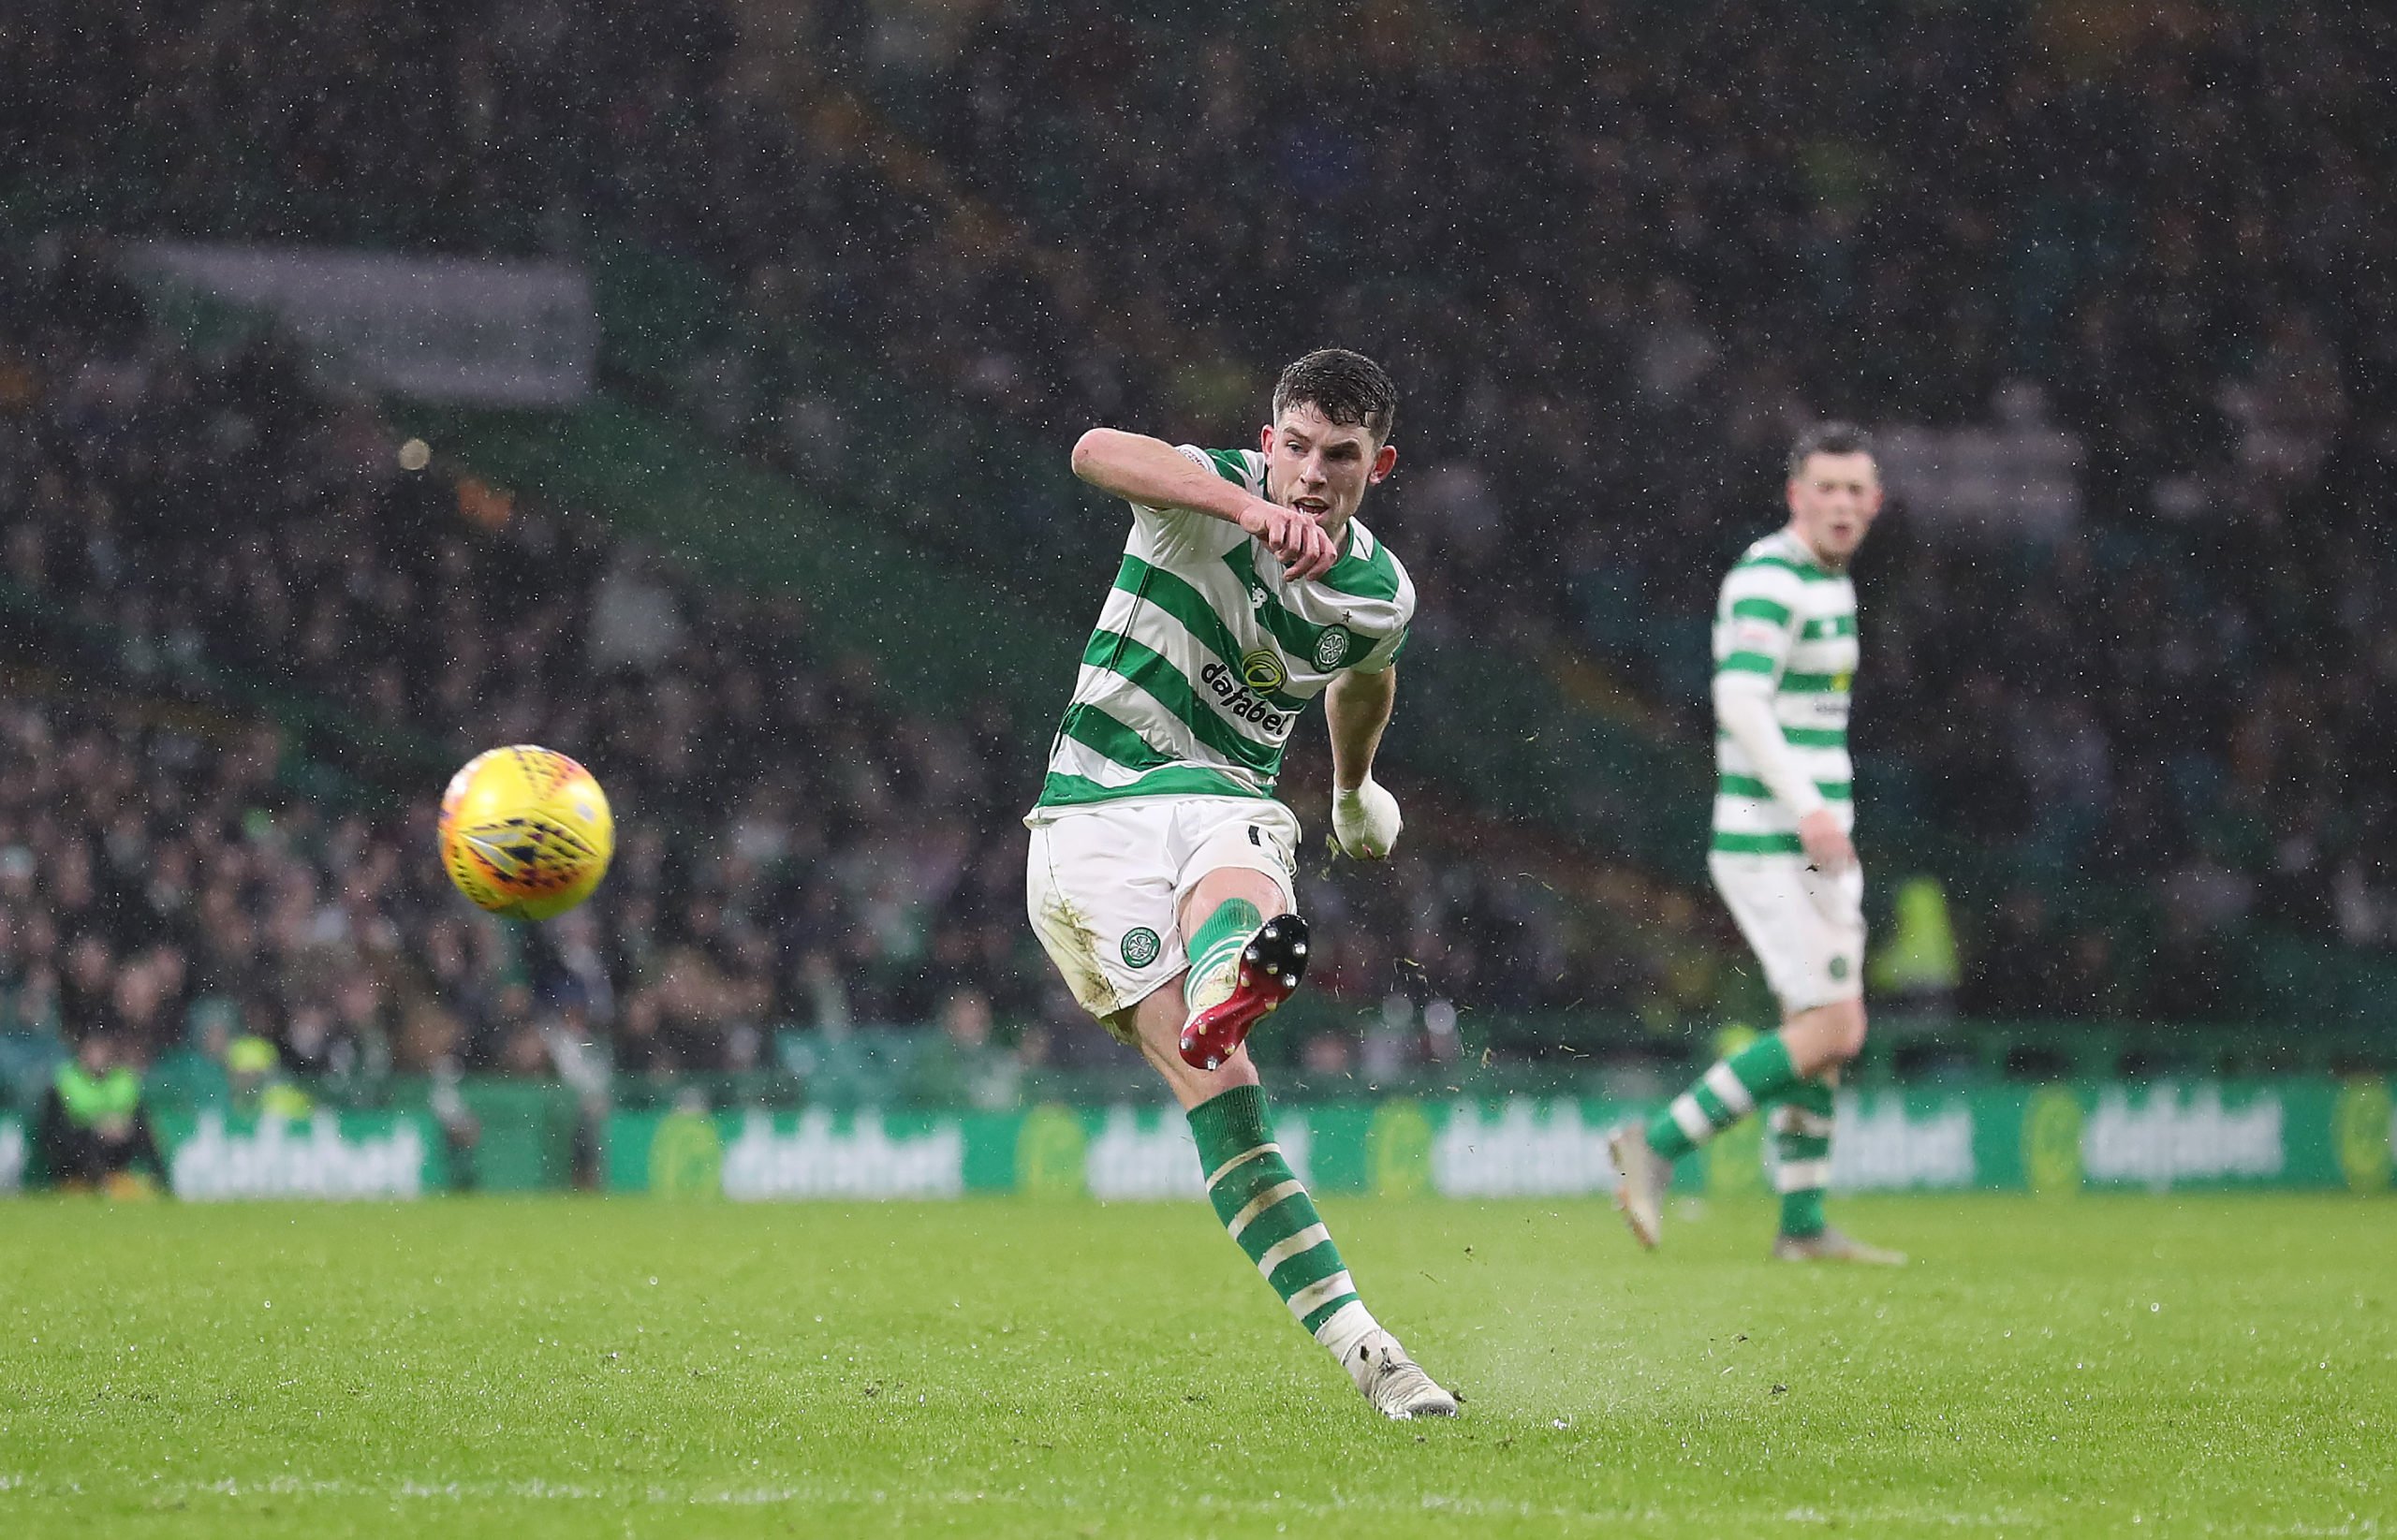 Ryan Christie addresses leaving Celtic; says he tries to promote Scottish football